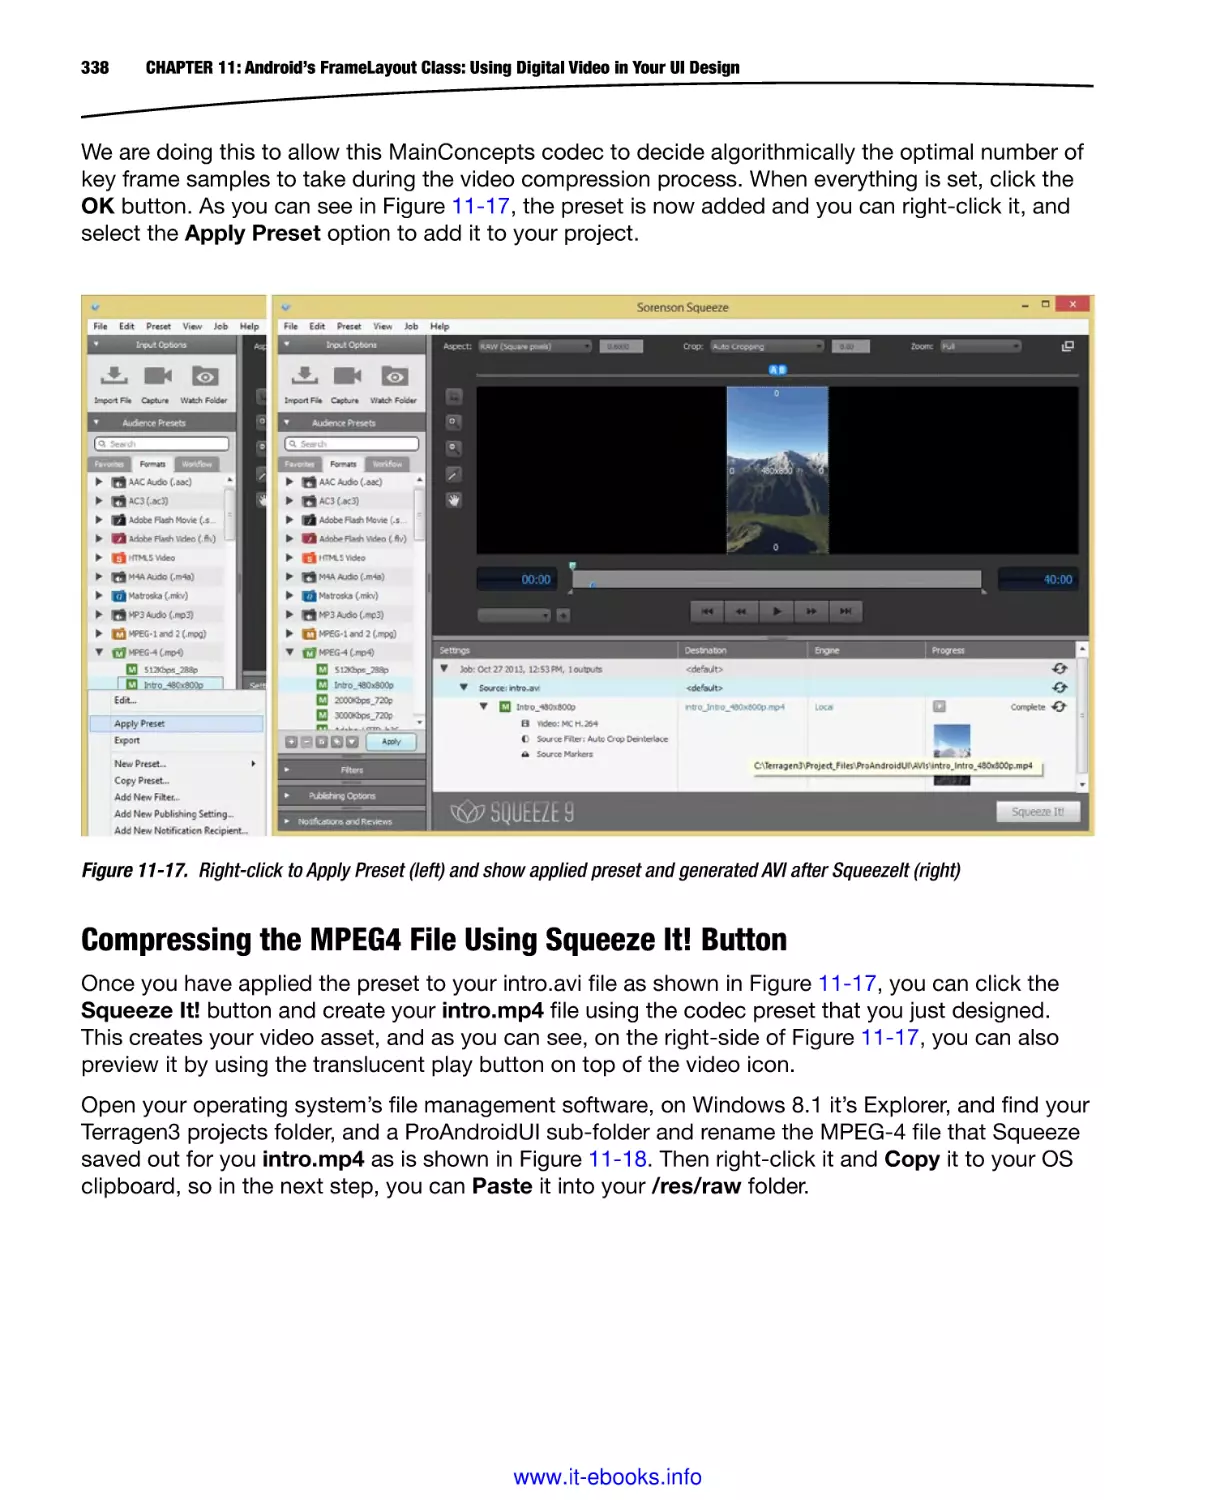 Compressing the MPEG4 File Using Squeeze It! Button